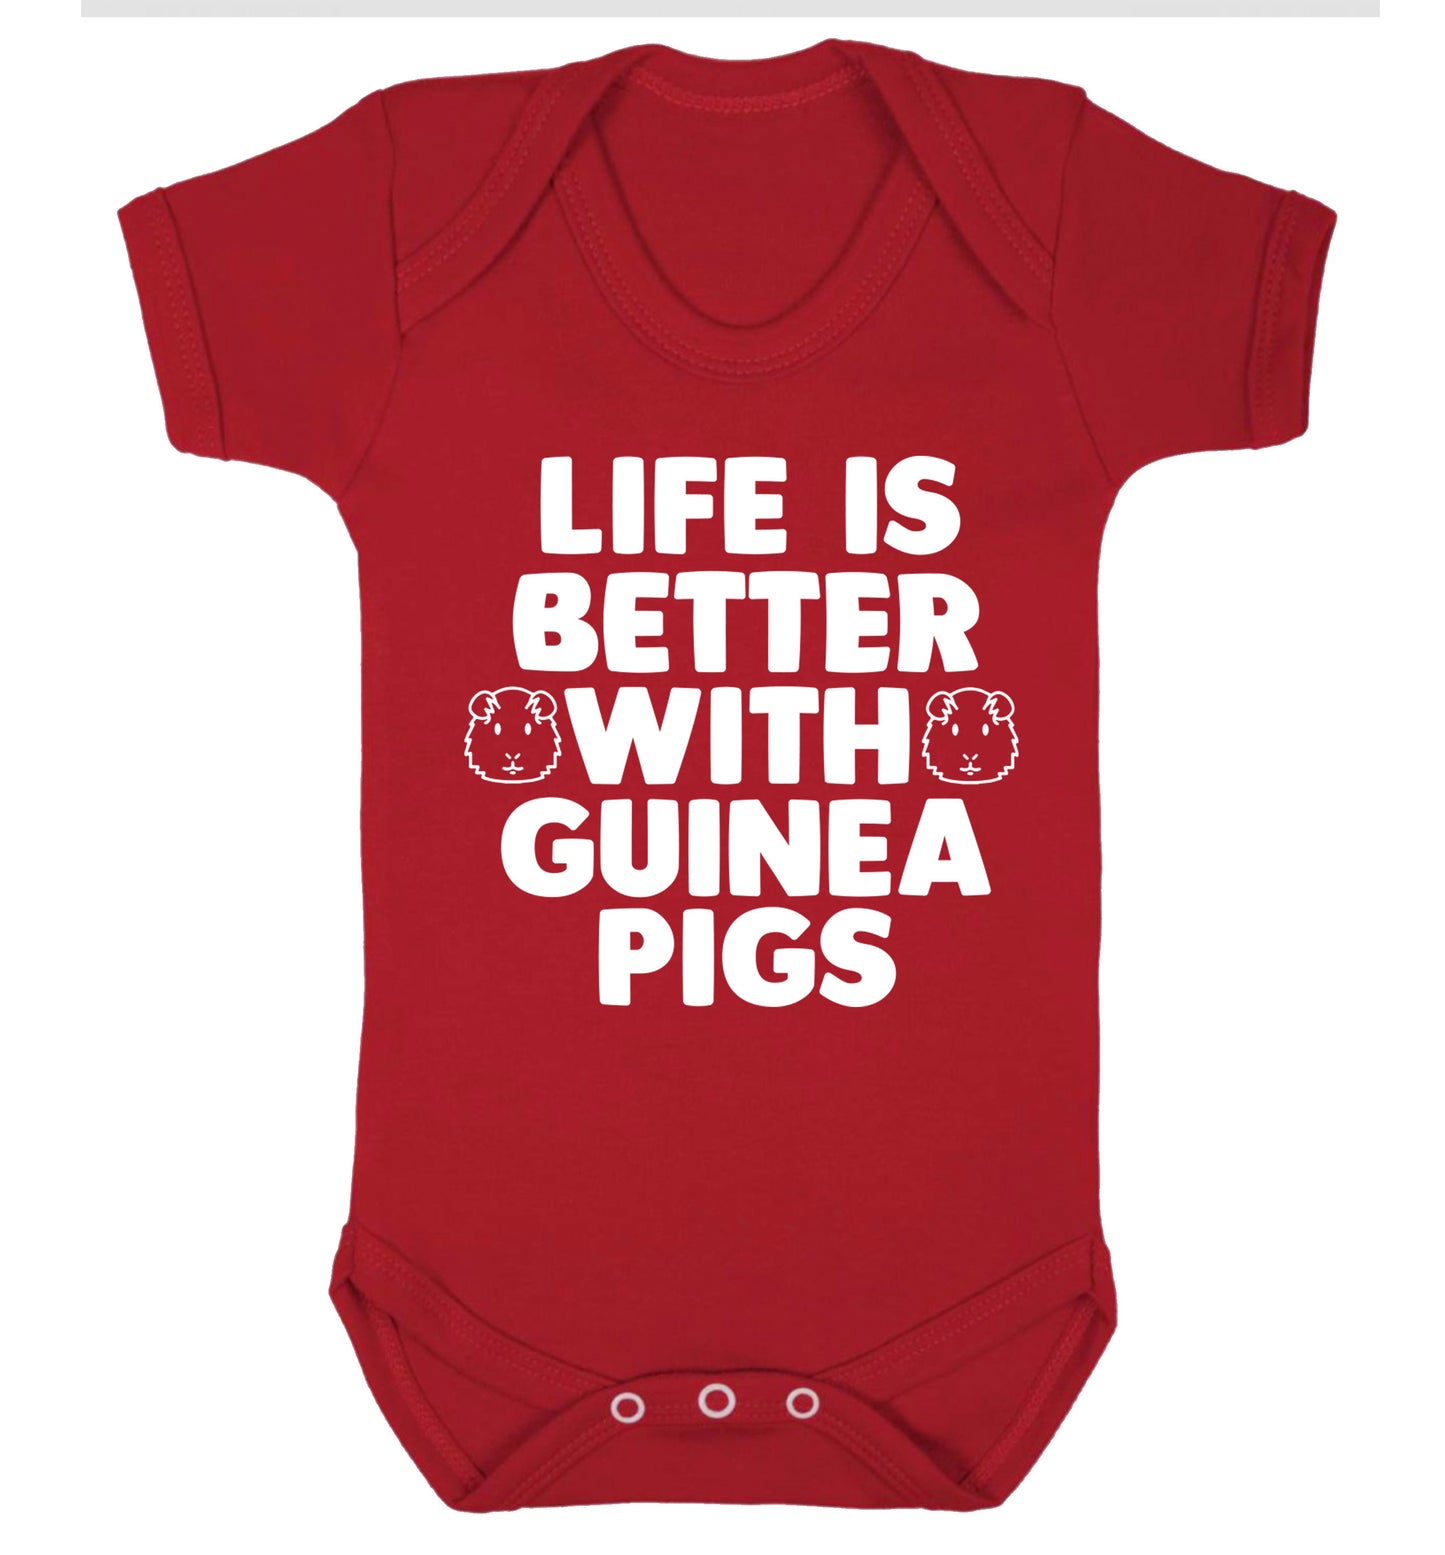 Life is better with guinea pigs Baby Vest red 18-24 months